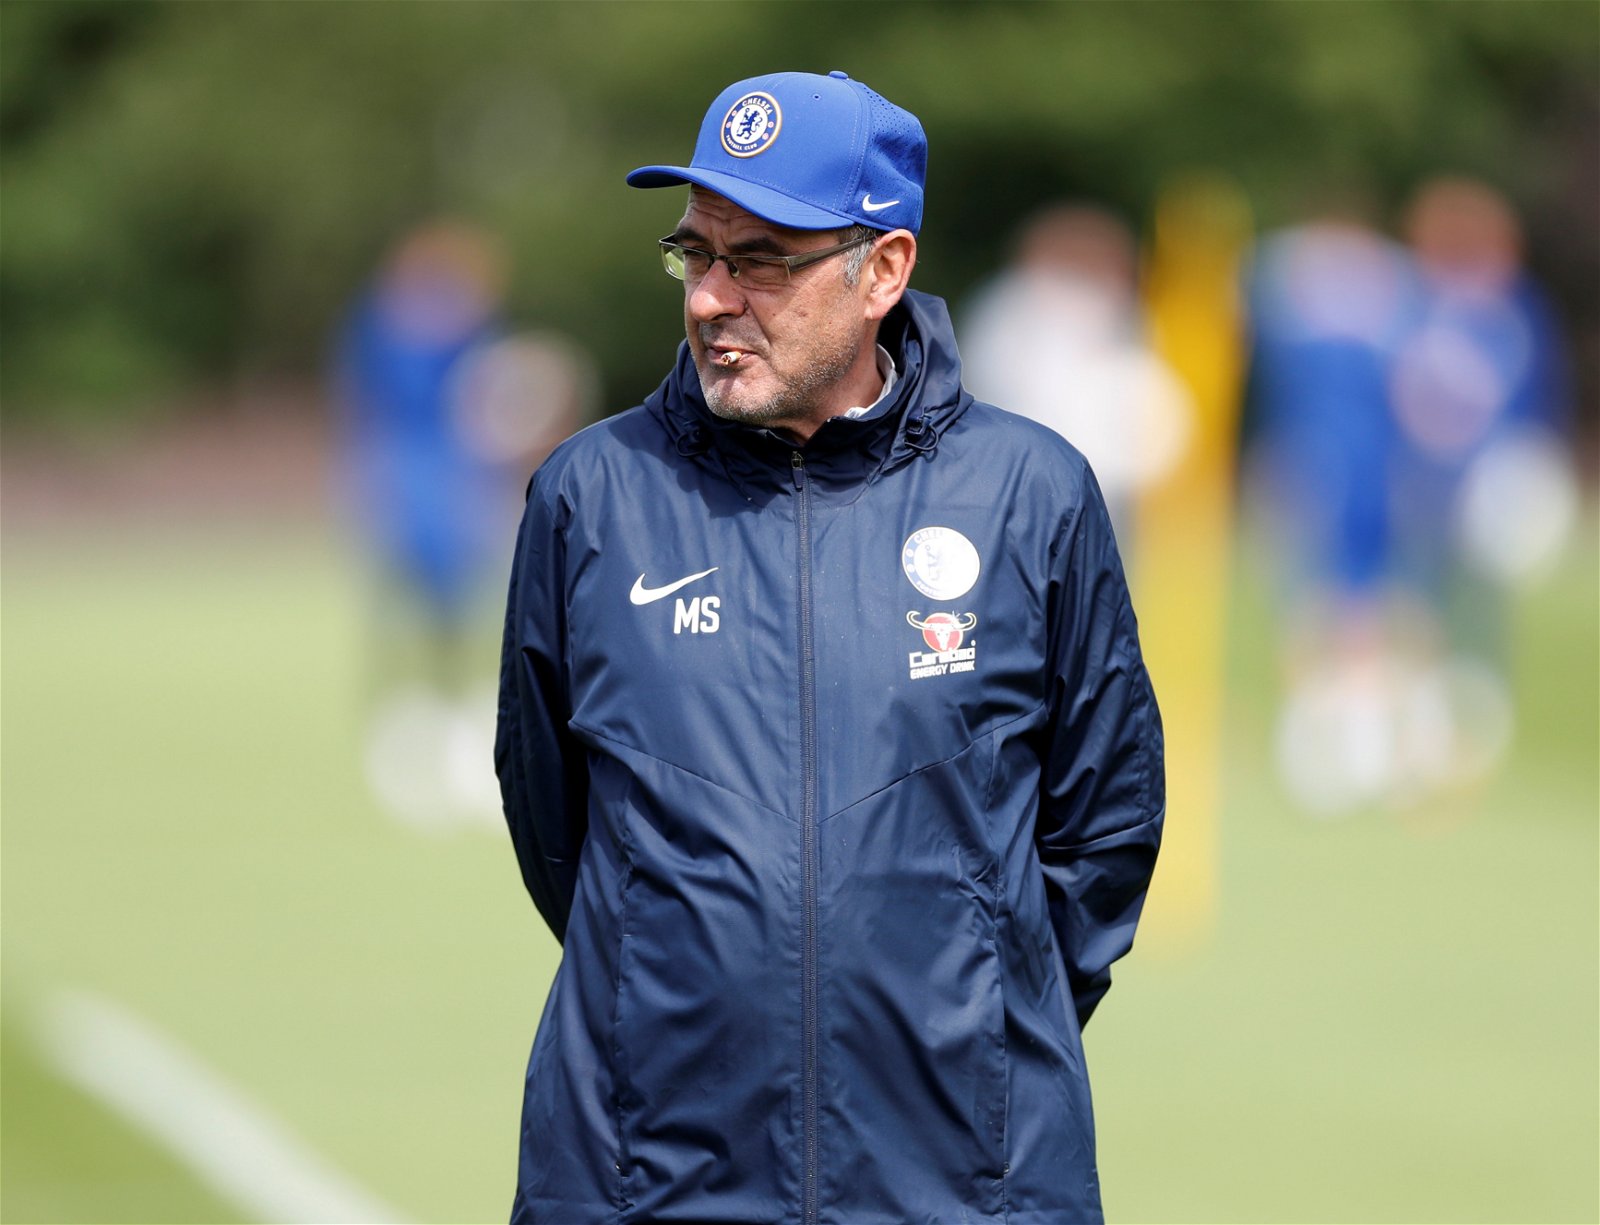 Maurizio Sarri has reportedly agreed terms with Juventus